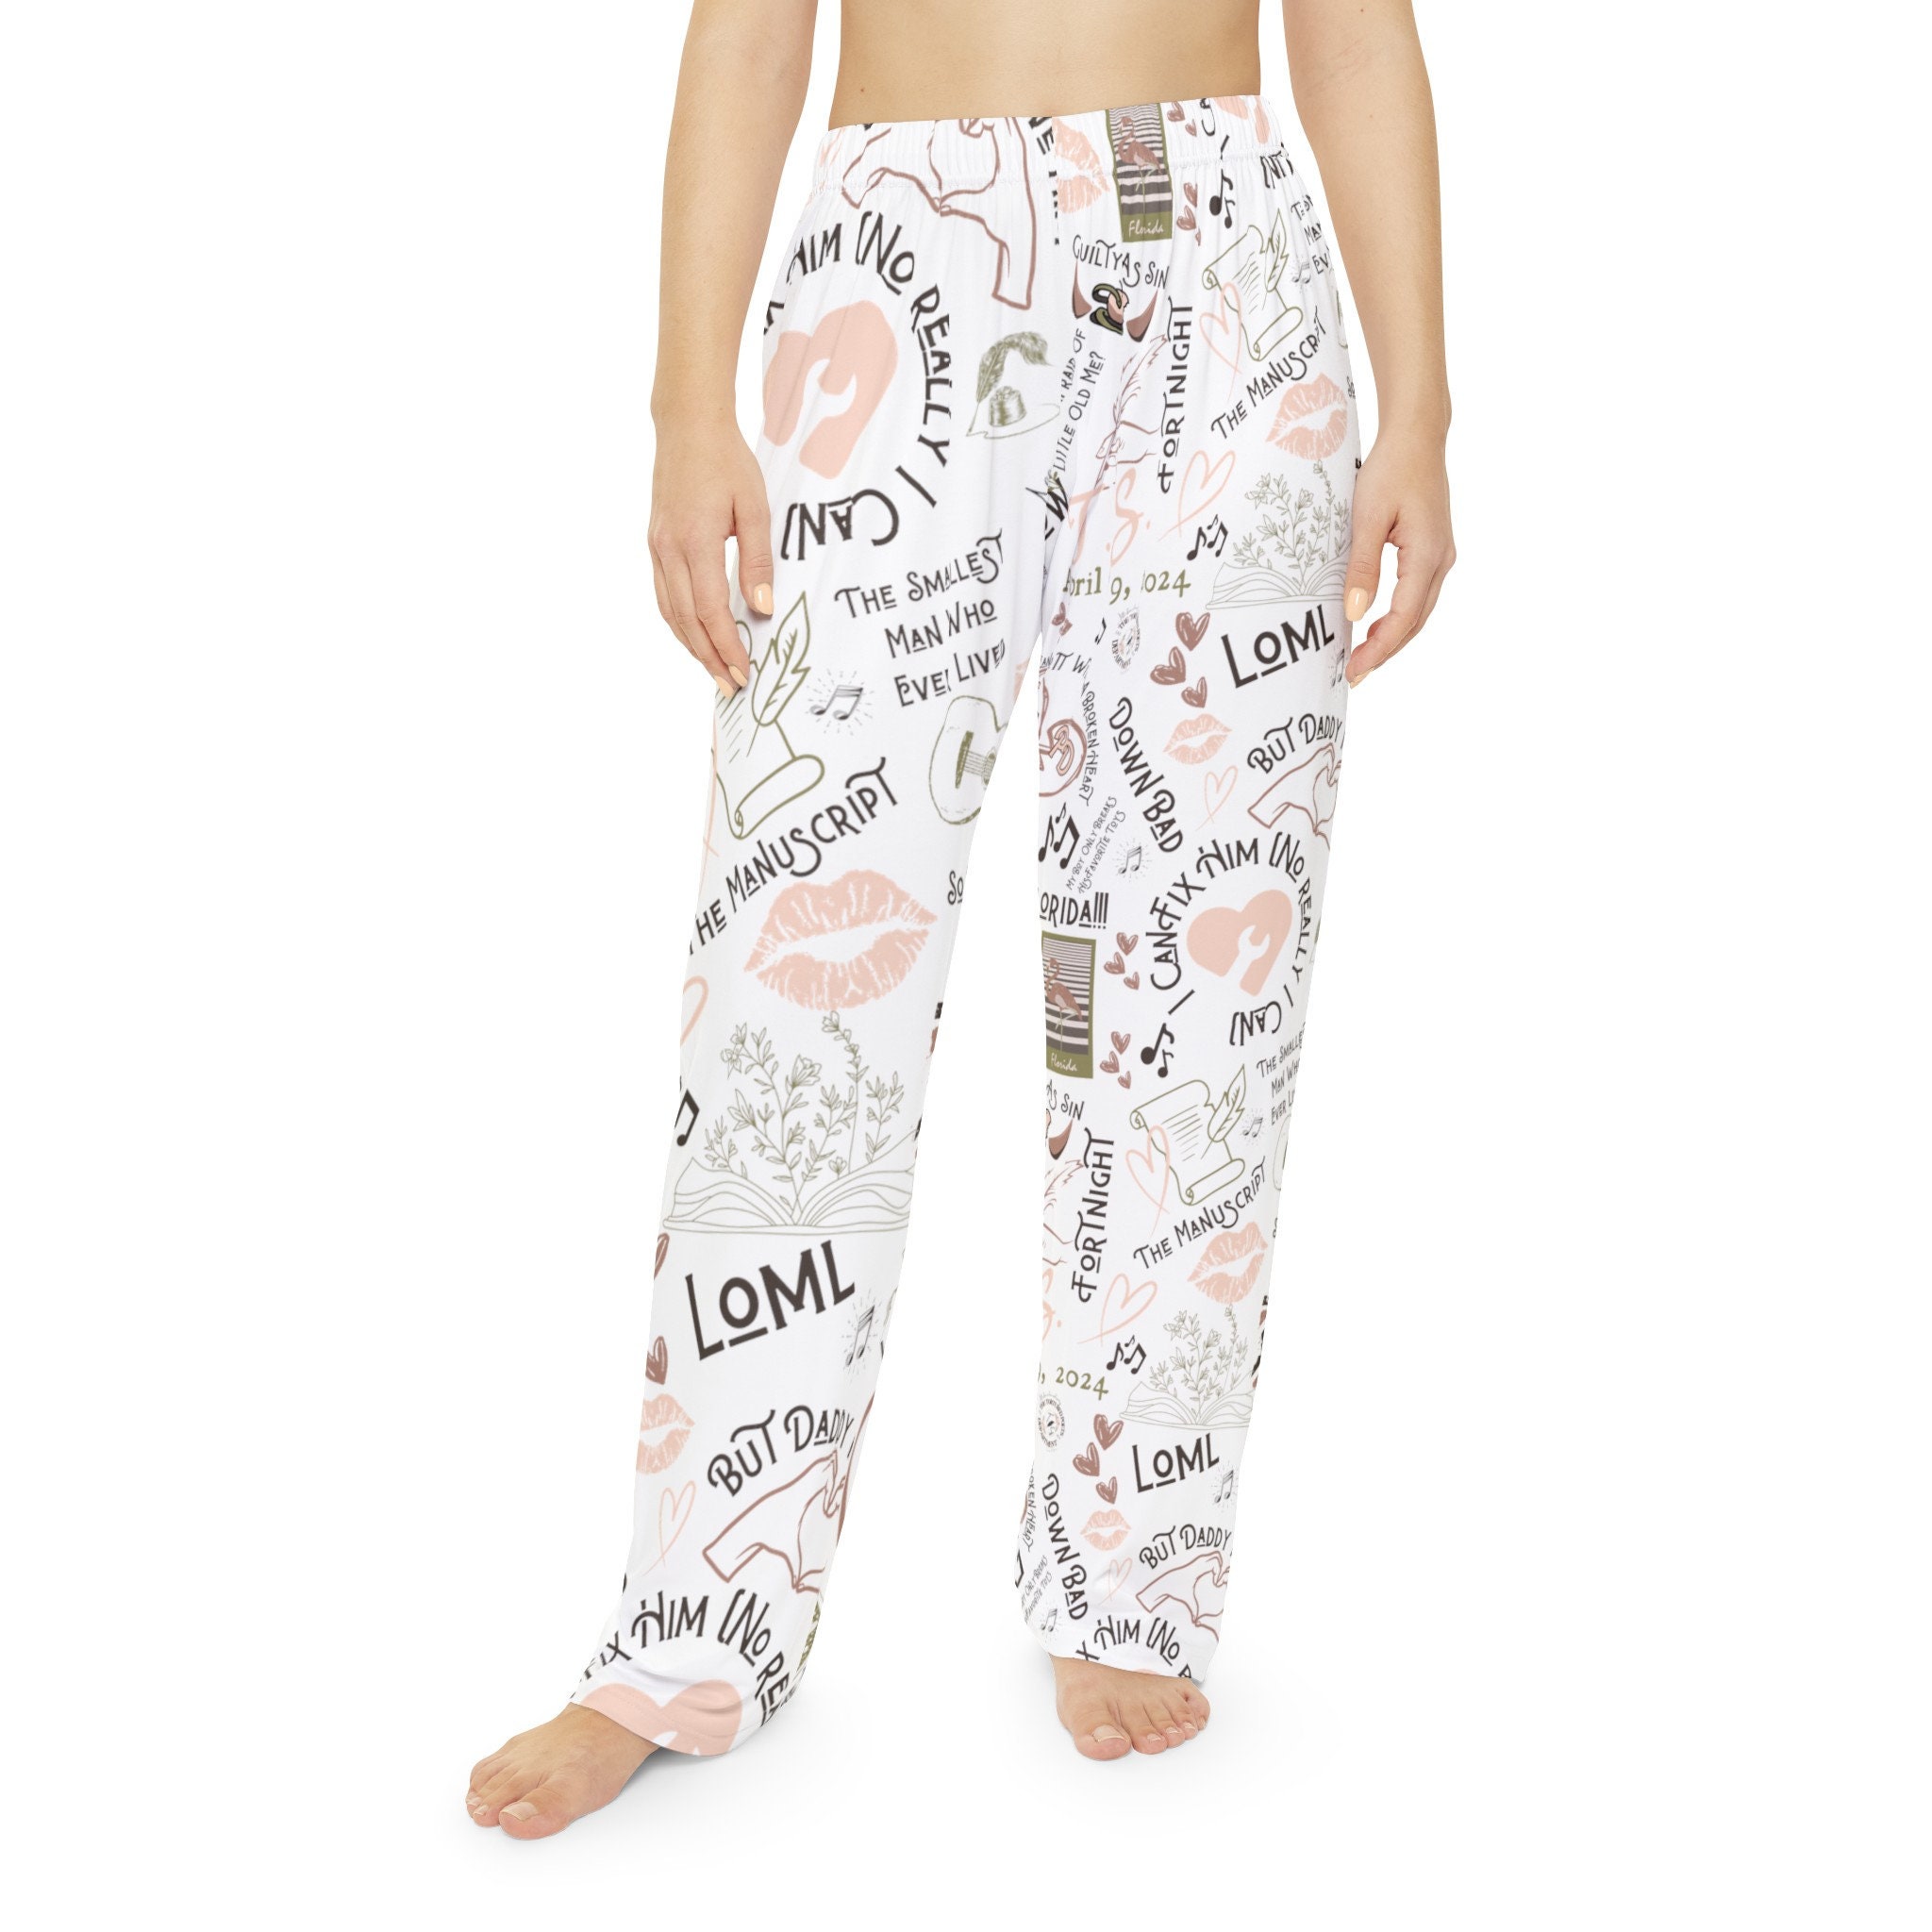 Tortured Poets Department TTPD Women's Pajama Pants, Taylor Merch, Gift For Mother's day